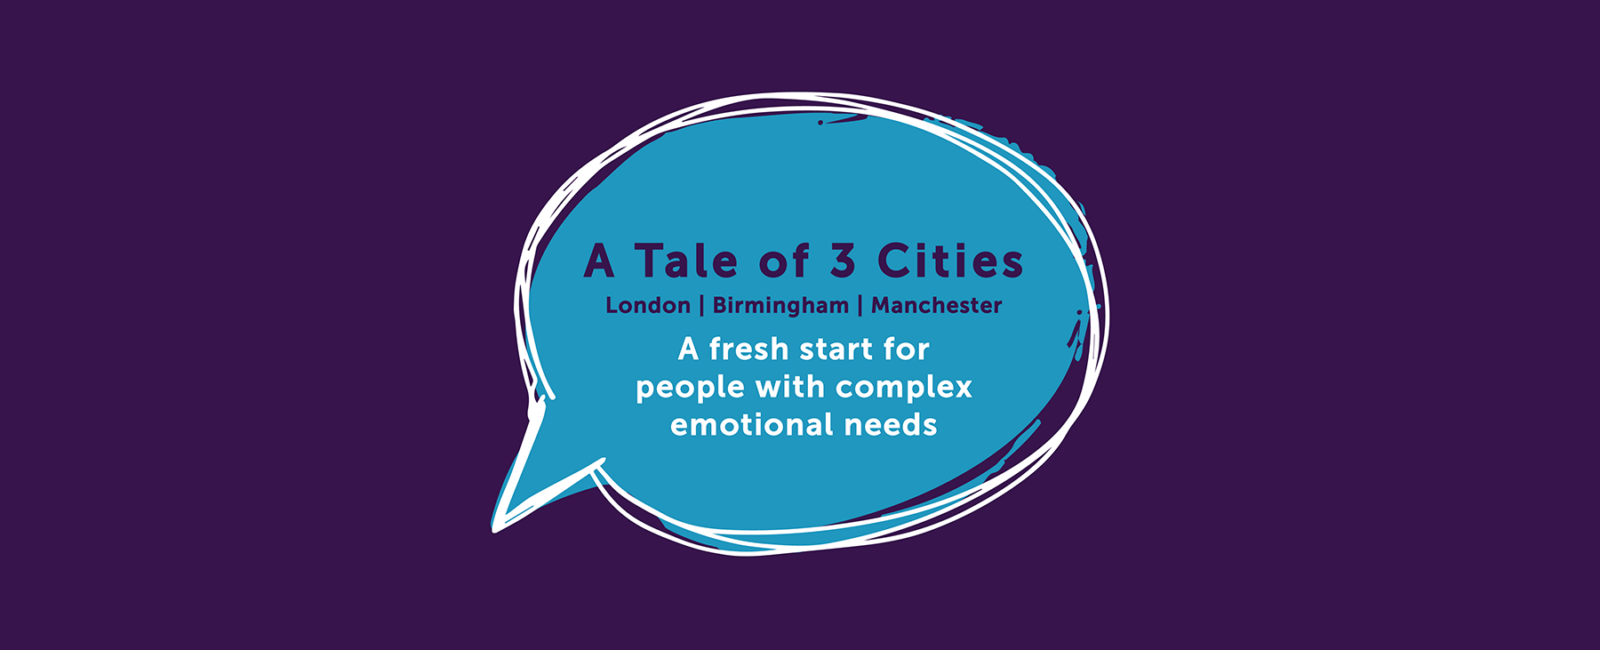 A Tale of 3 Cities. London, Birmingham, Manchester. A fresh start for people with complex emotional needs